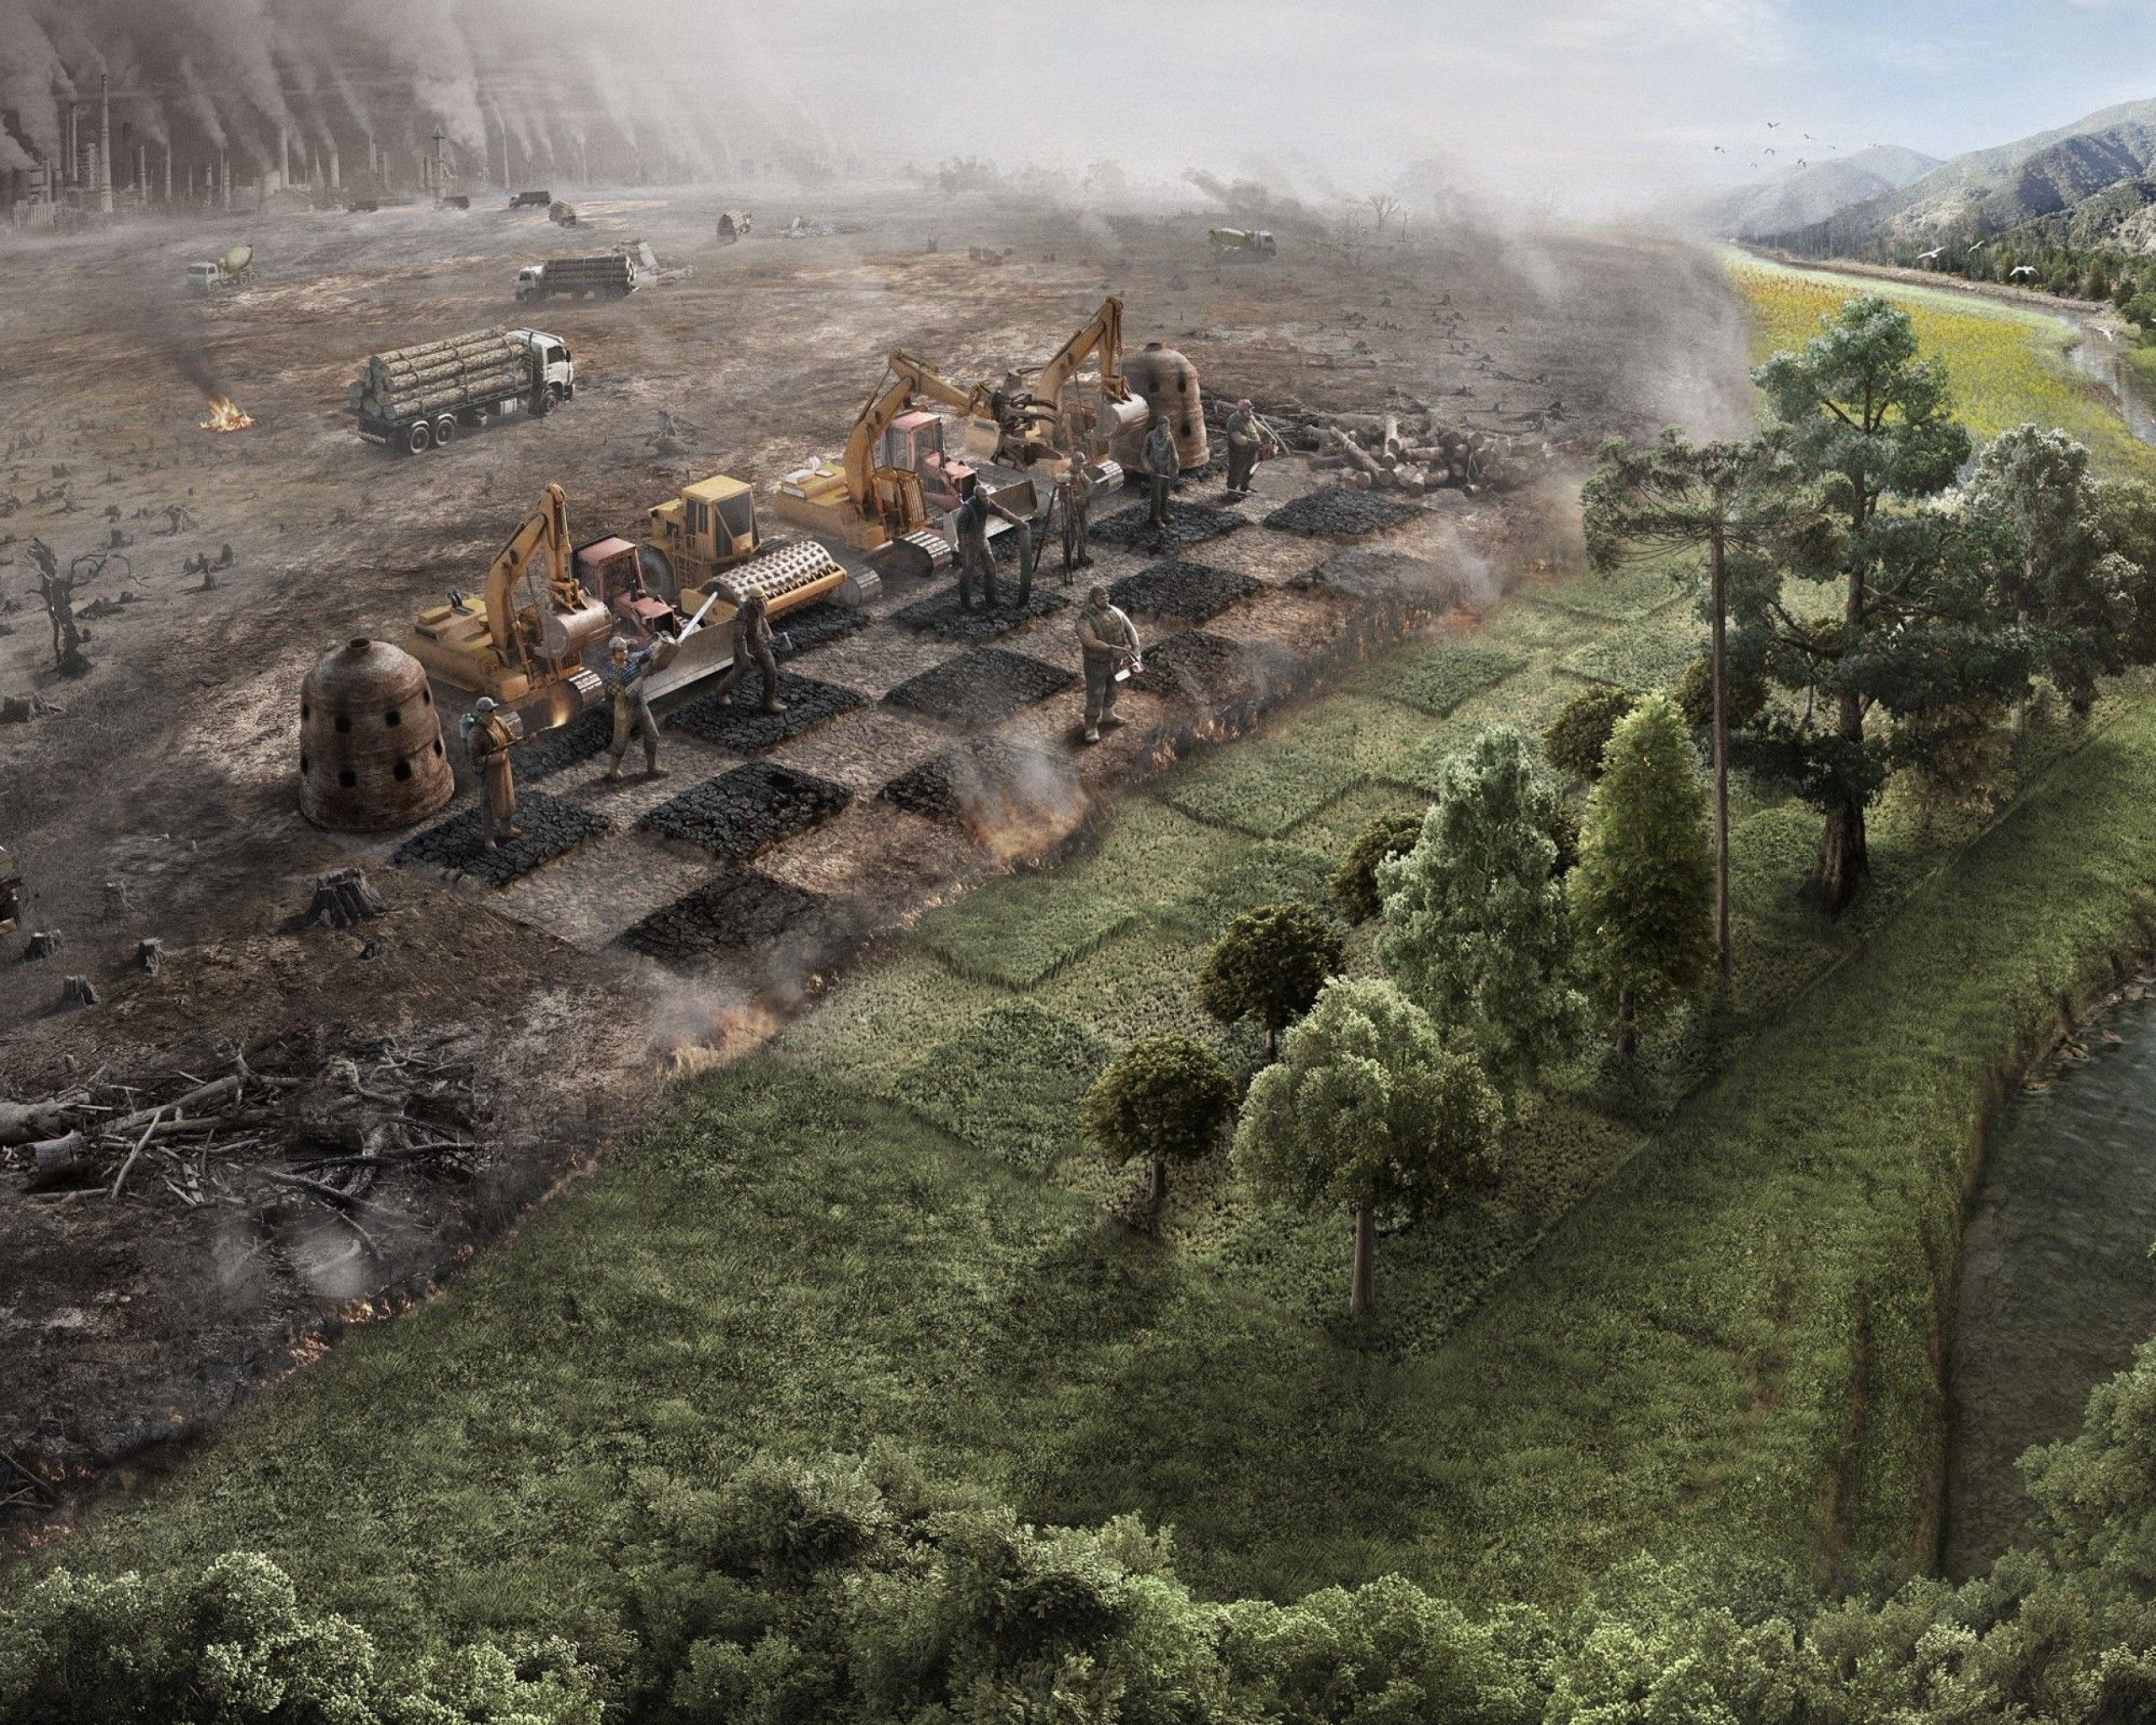 deforestation vs nature, Powerful picture